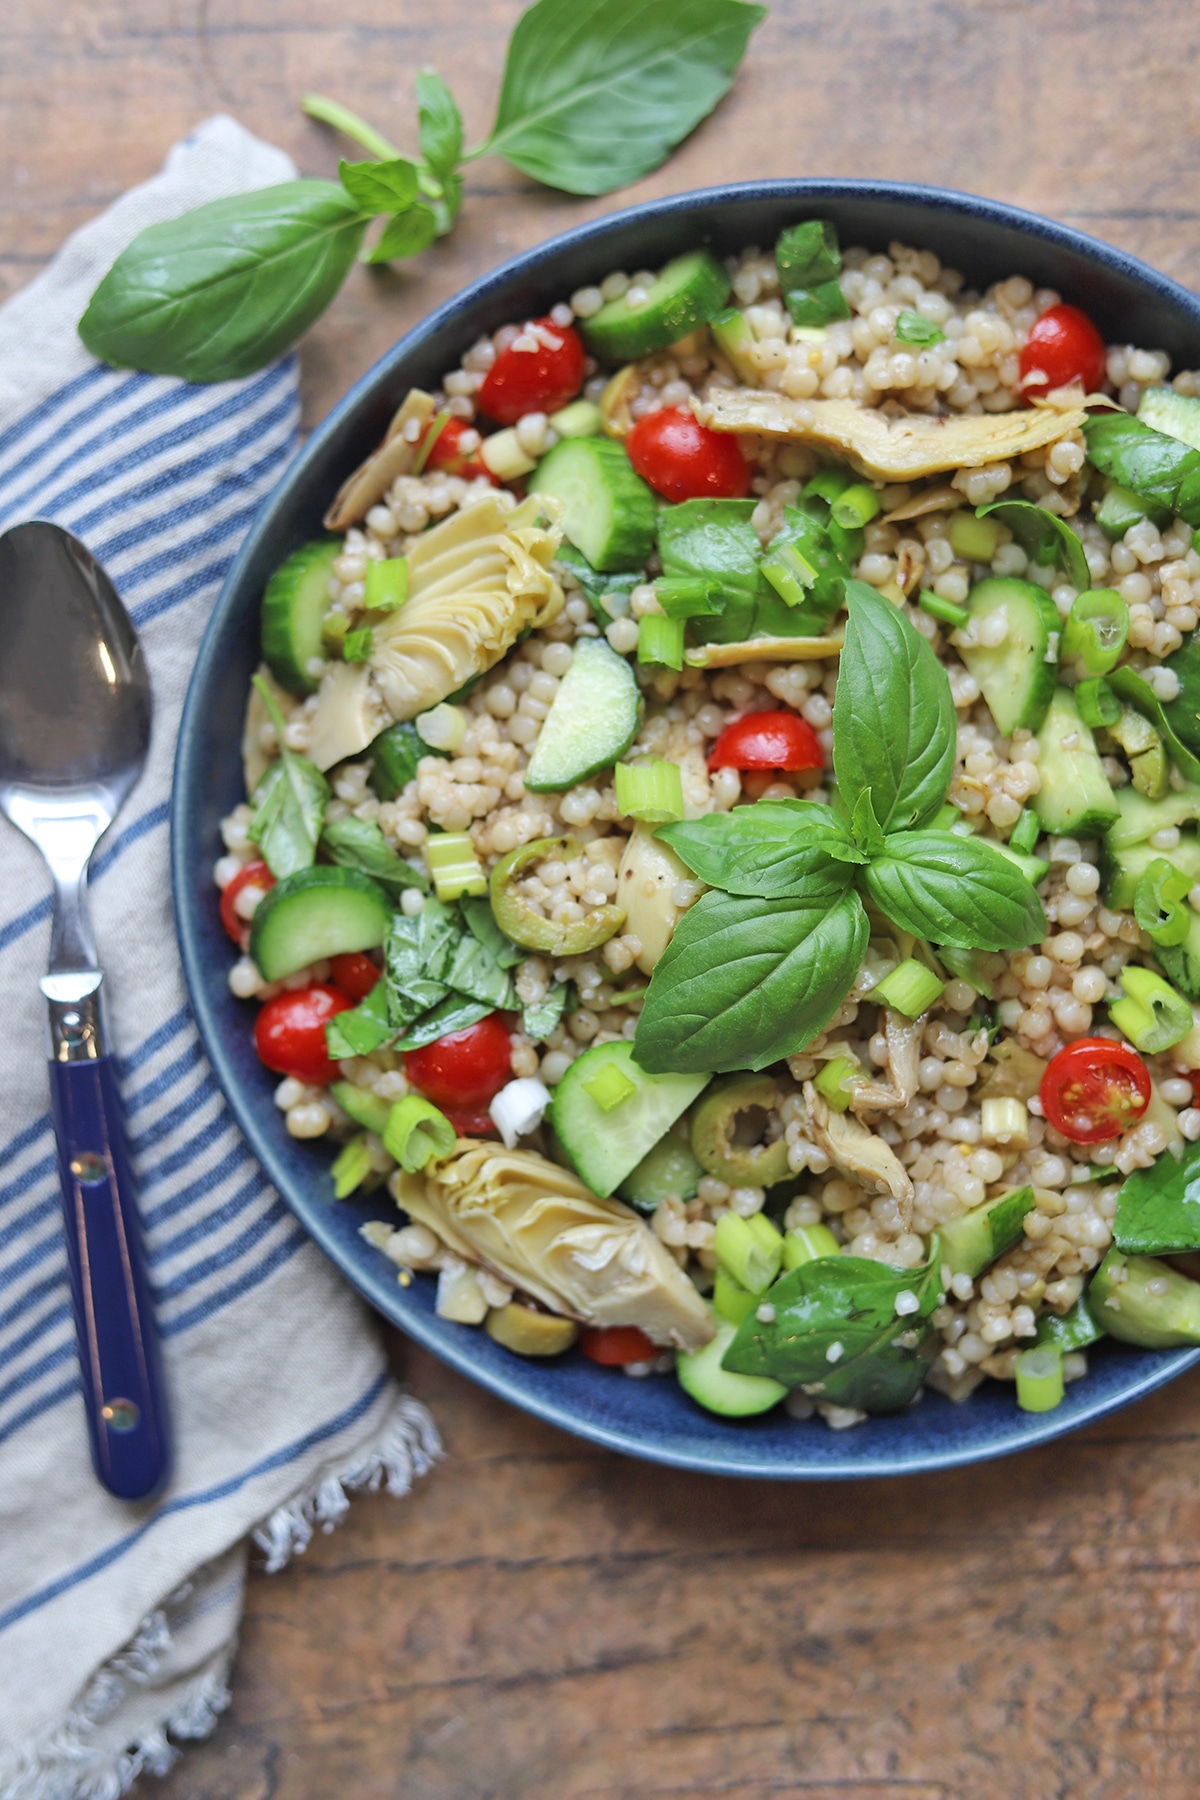 Israeli couscous salad in blue bowl by spoon.